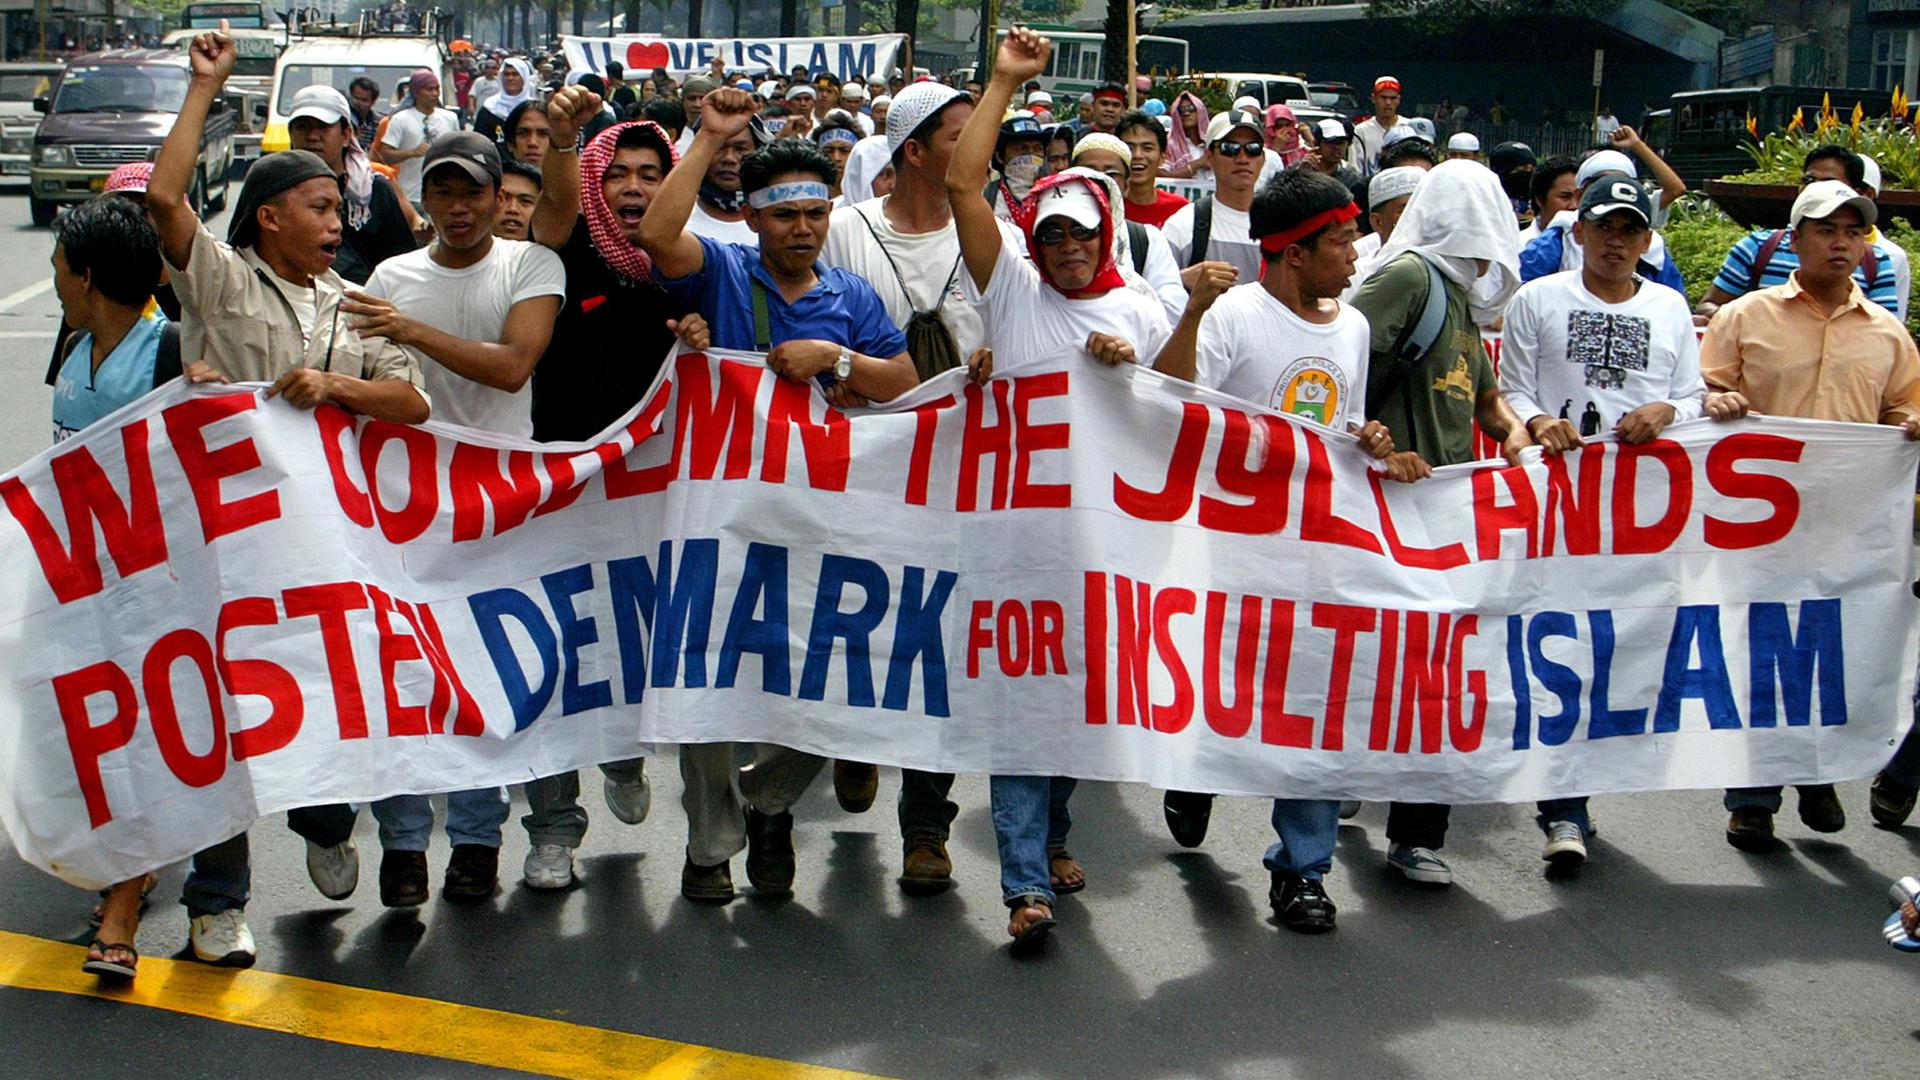 Filipino Muslims hold a banner during a rally outside the Danish embassy in Manila's Makati financial district February 15, 2006. The protesters were demonstrating against cartoons depicting the Prophet Mohammad that were published by a Danish newspaper.